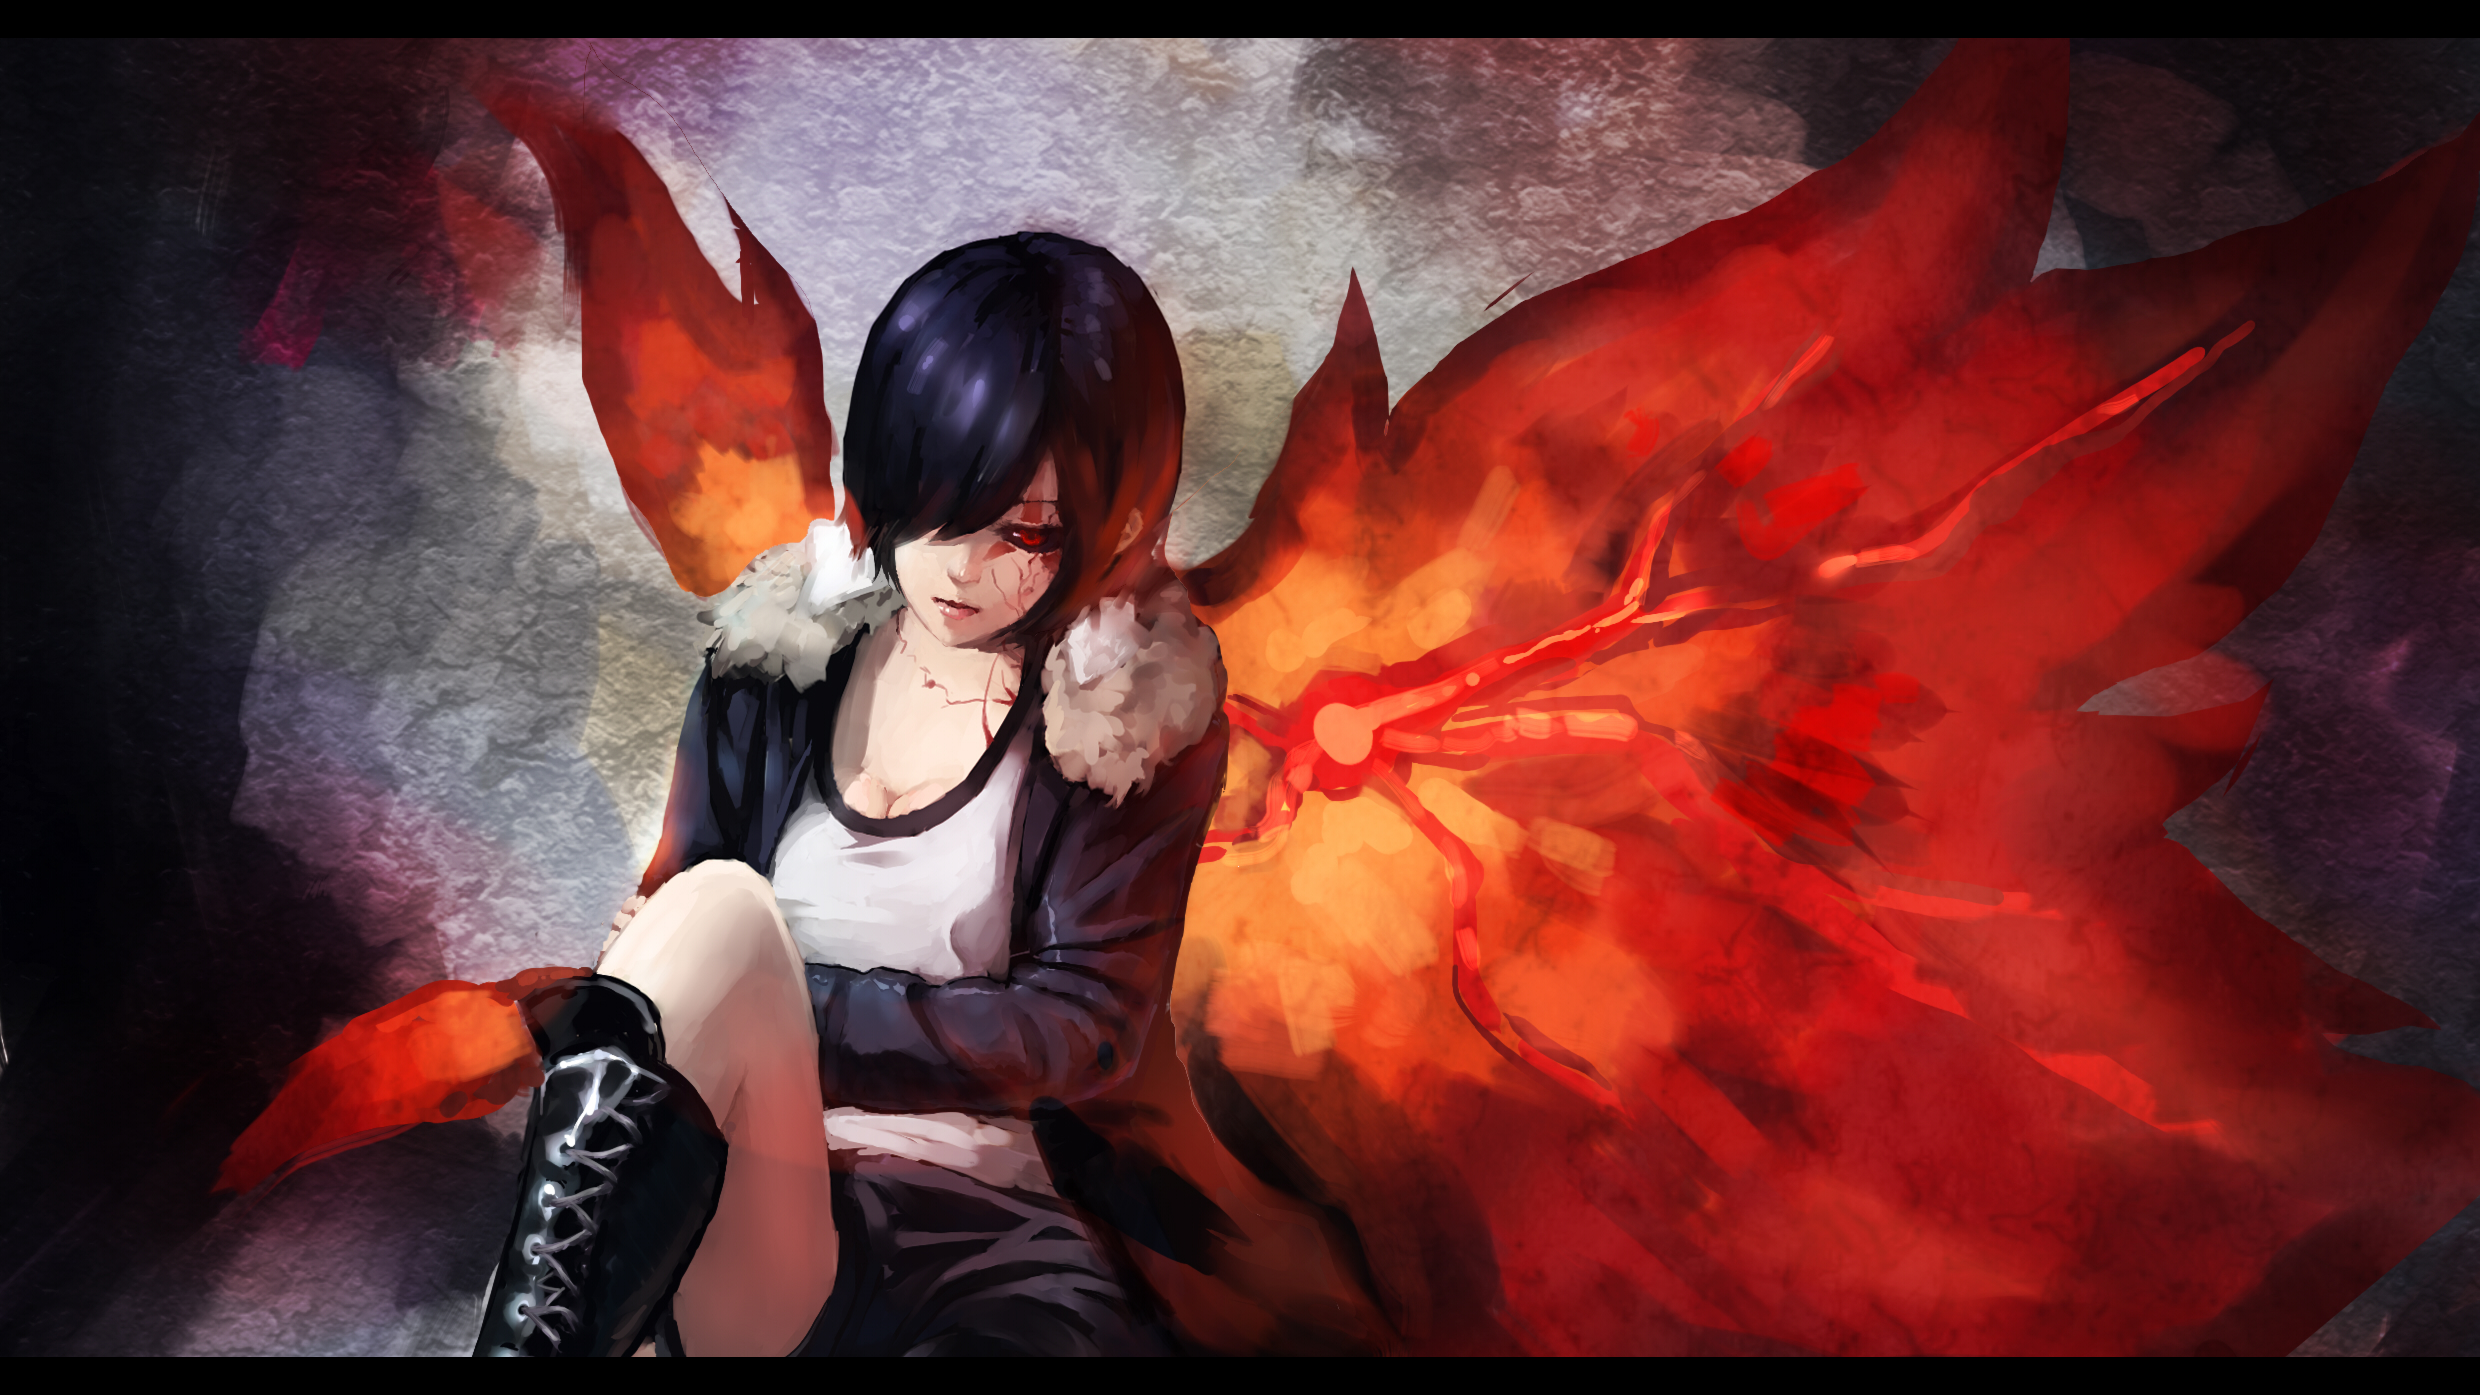 Anime Tokyo Ghoul HD Wallpaper by gods (Pixiv)